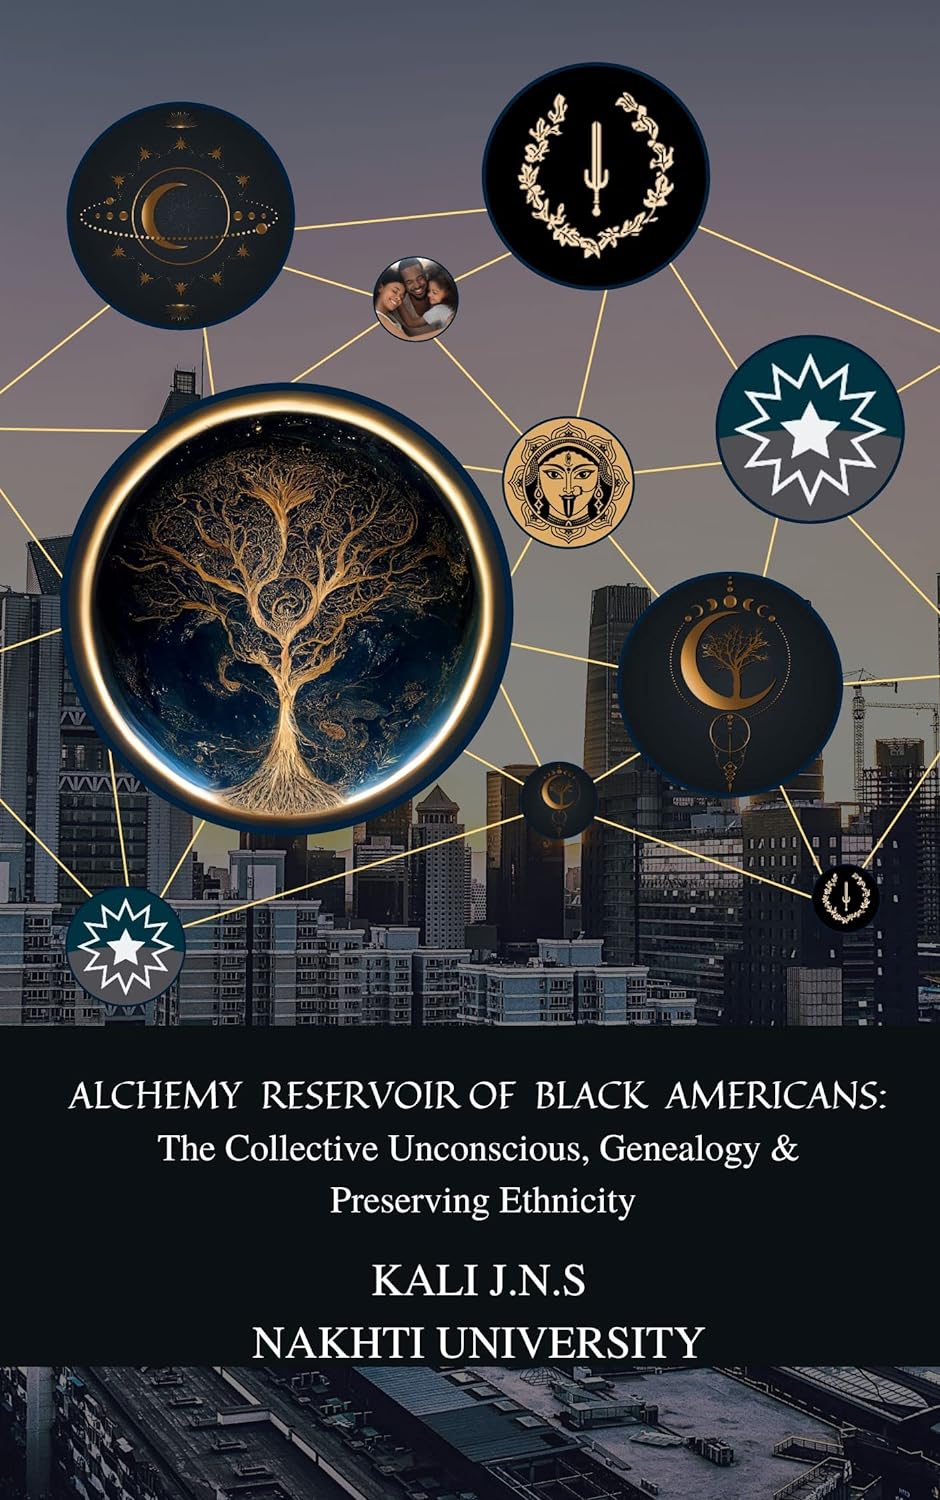 Alchemy Reservoir of Black Americans: The Collective Unconscious, Genealogy & Preserving Ethnicity